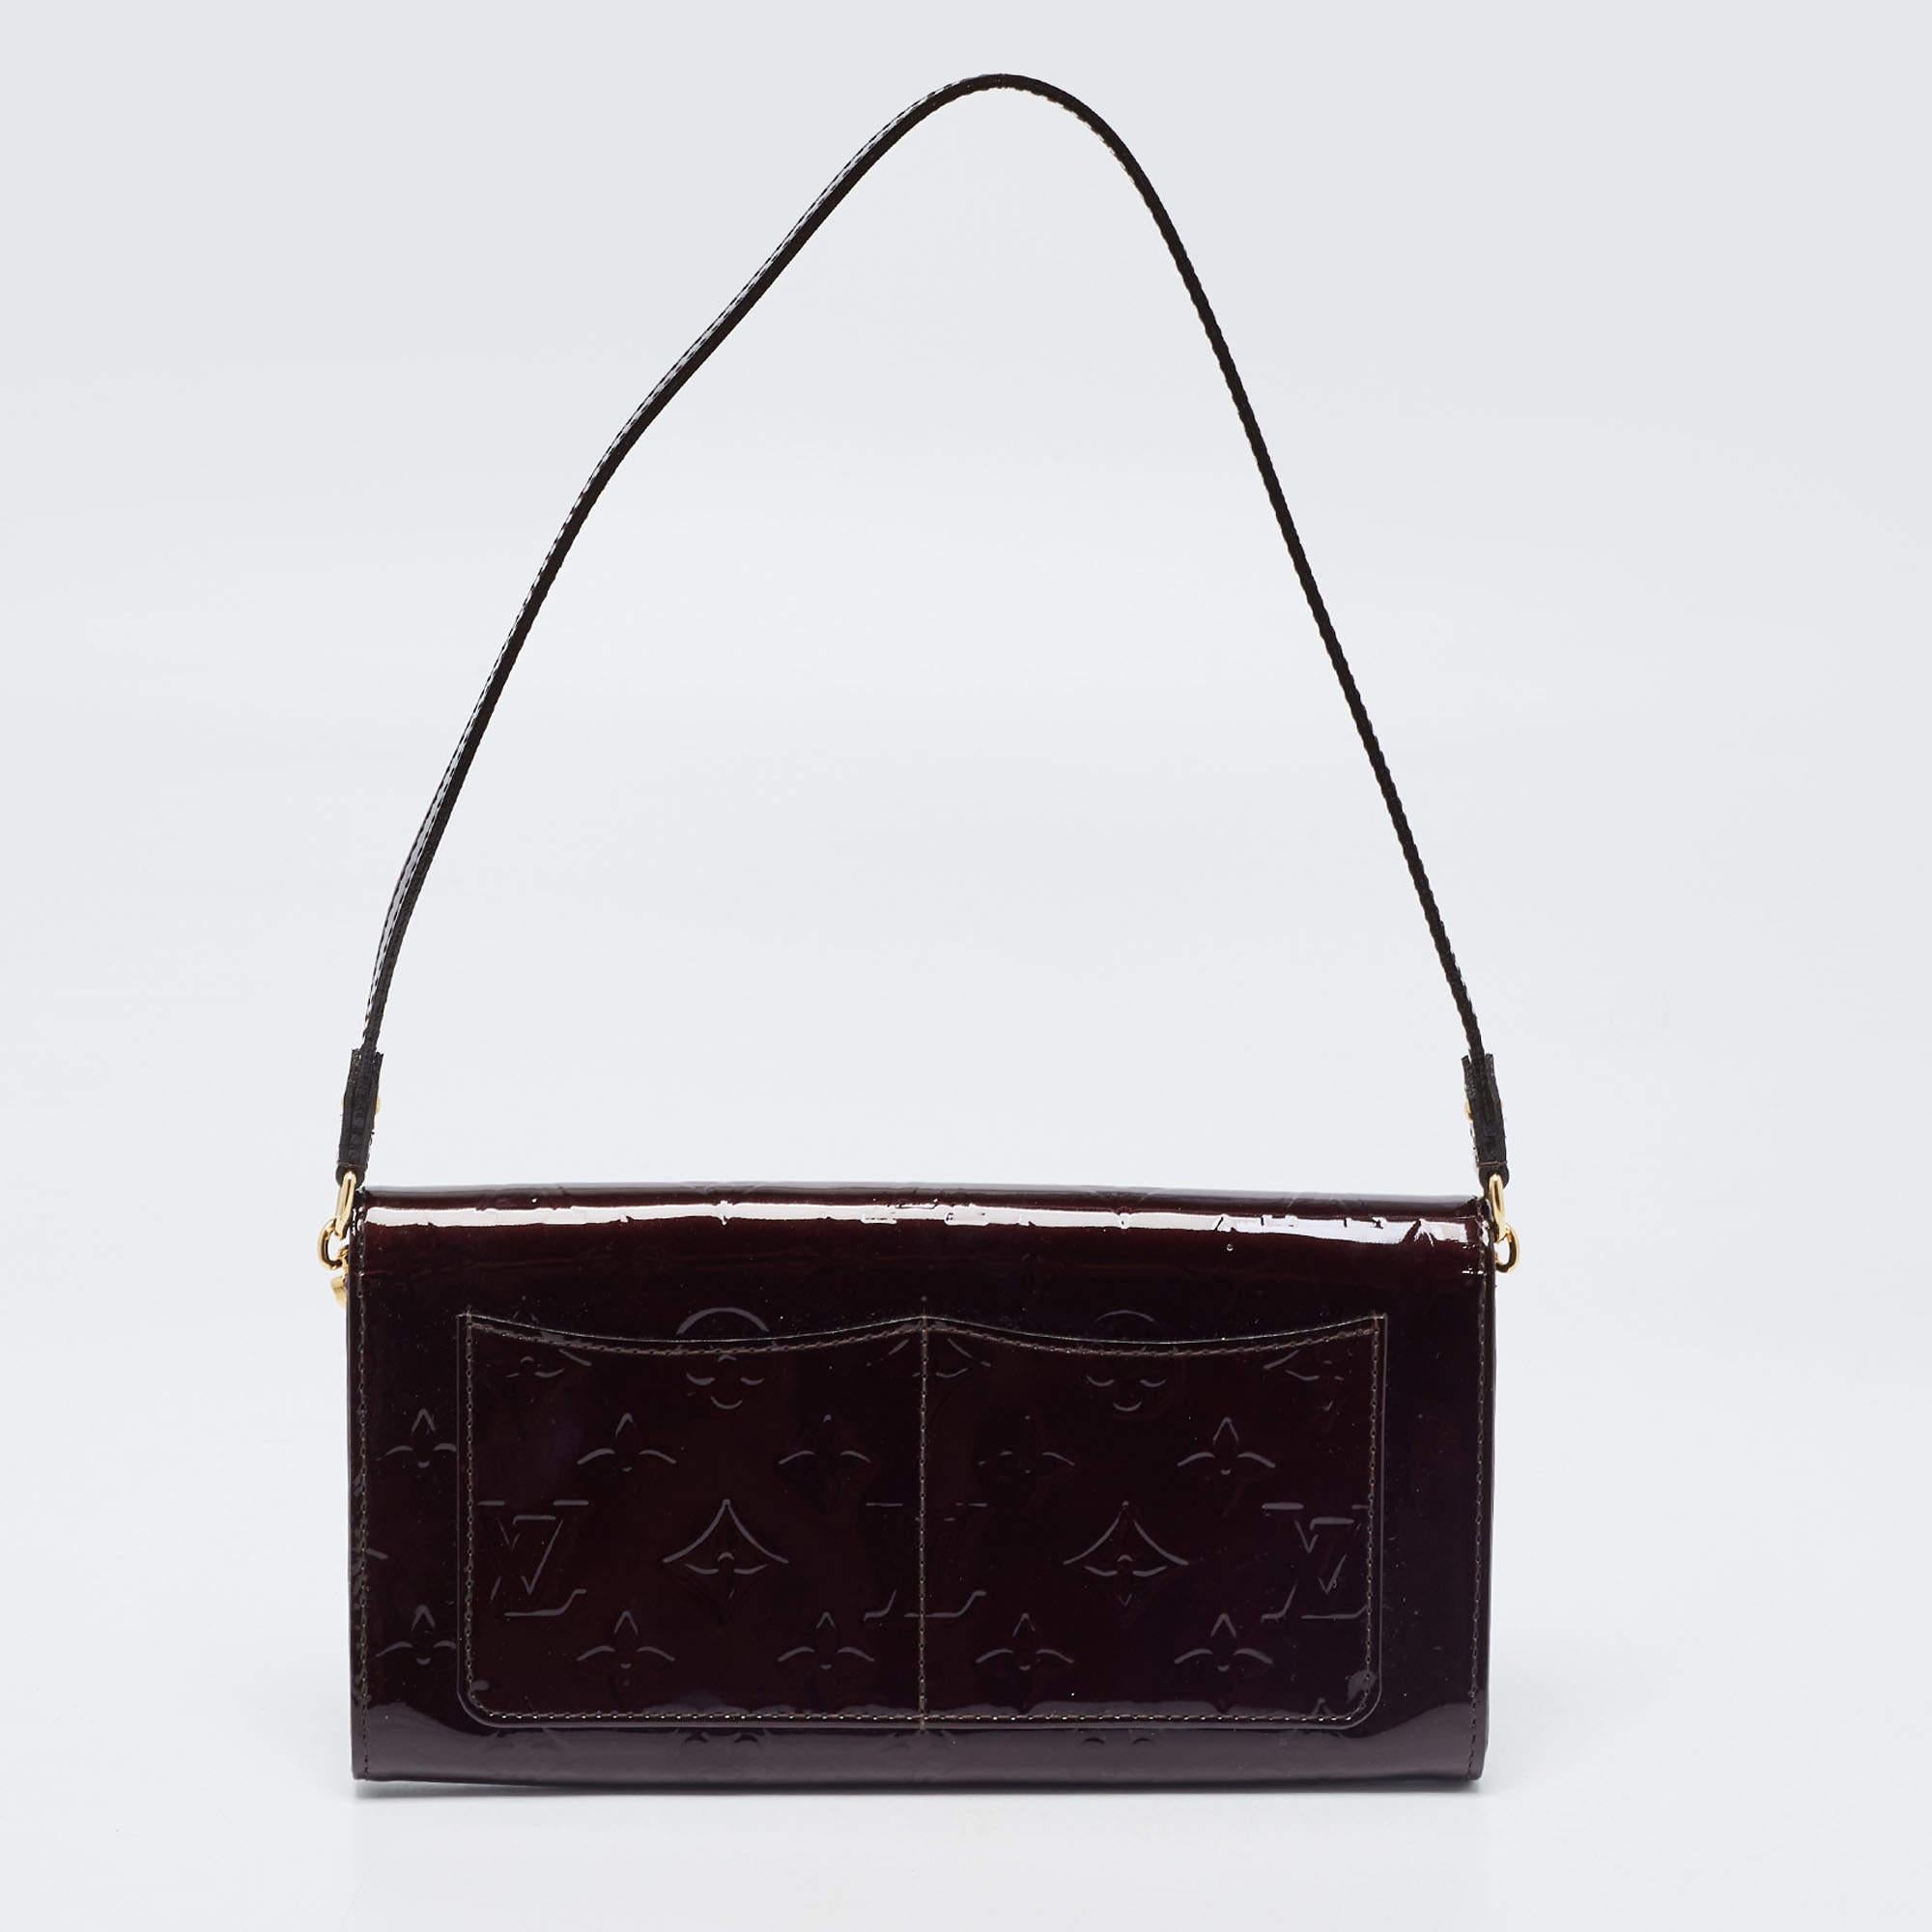 Handbags are more than just instruments to carry one's essentials. They essay a woman's sense of style and the better the bag, the more confidence she gets when she holds it. Louis Vuitton brings you one such creation meticulously crafted in a